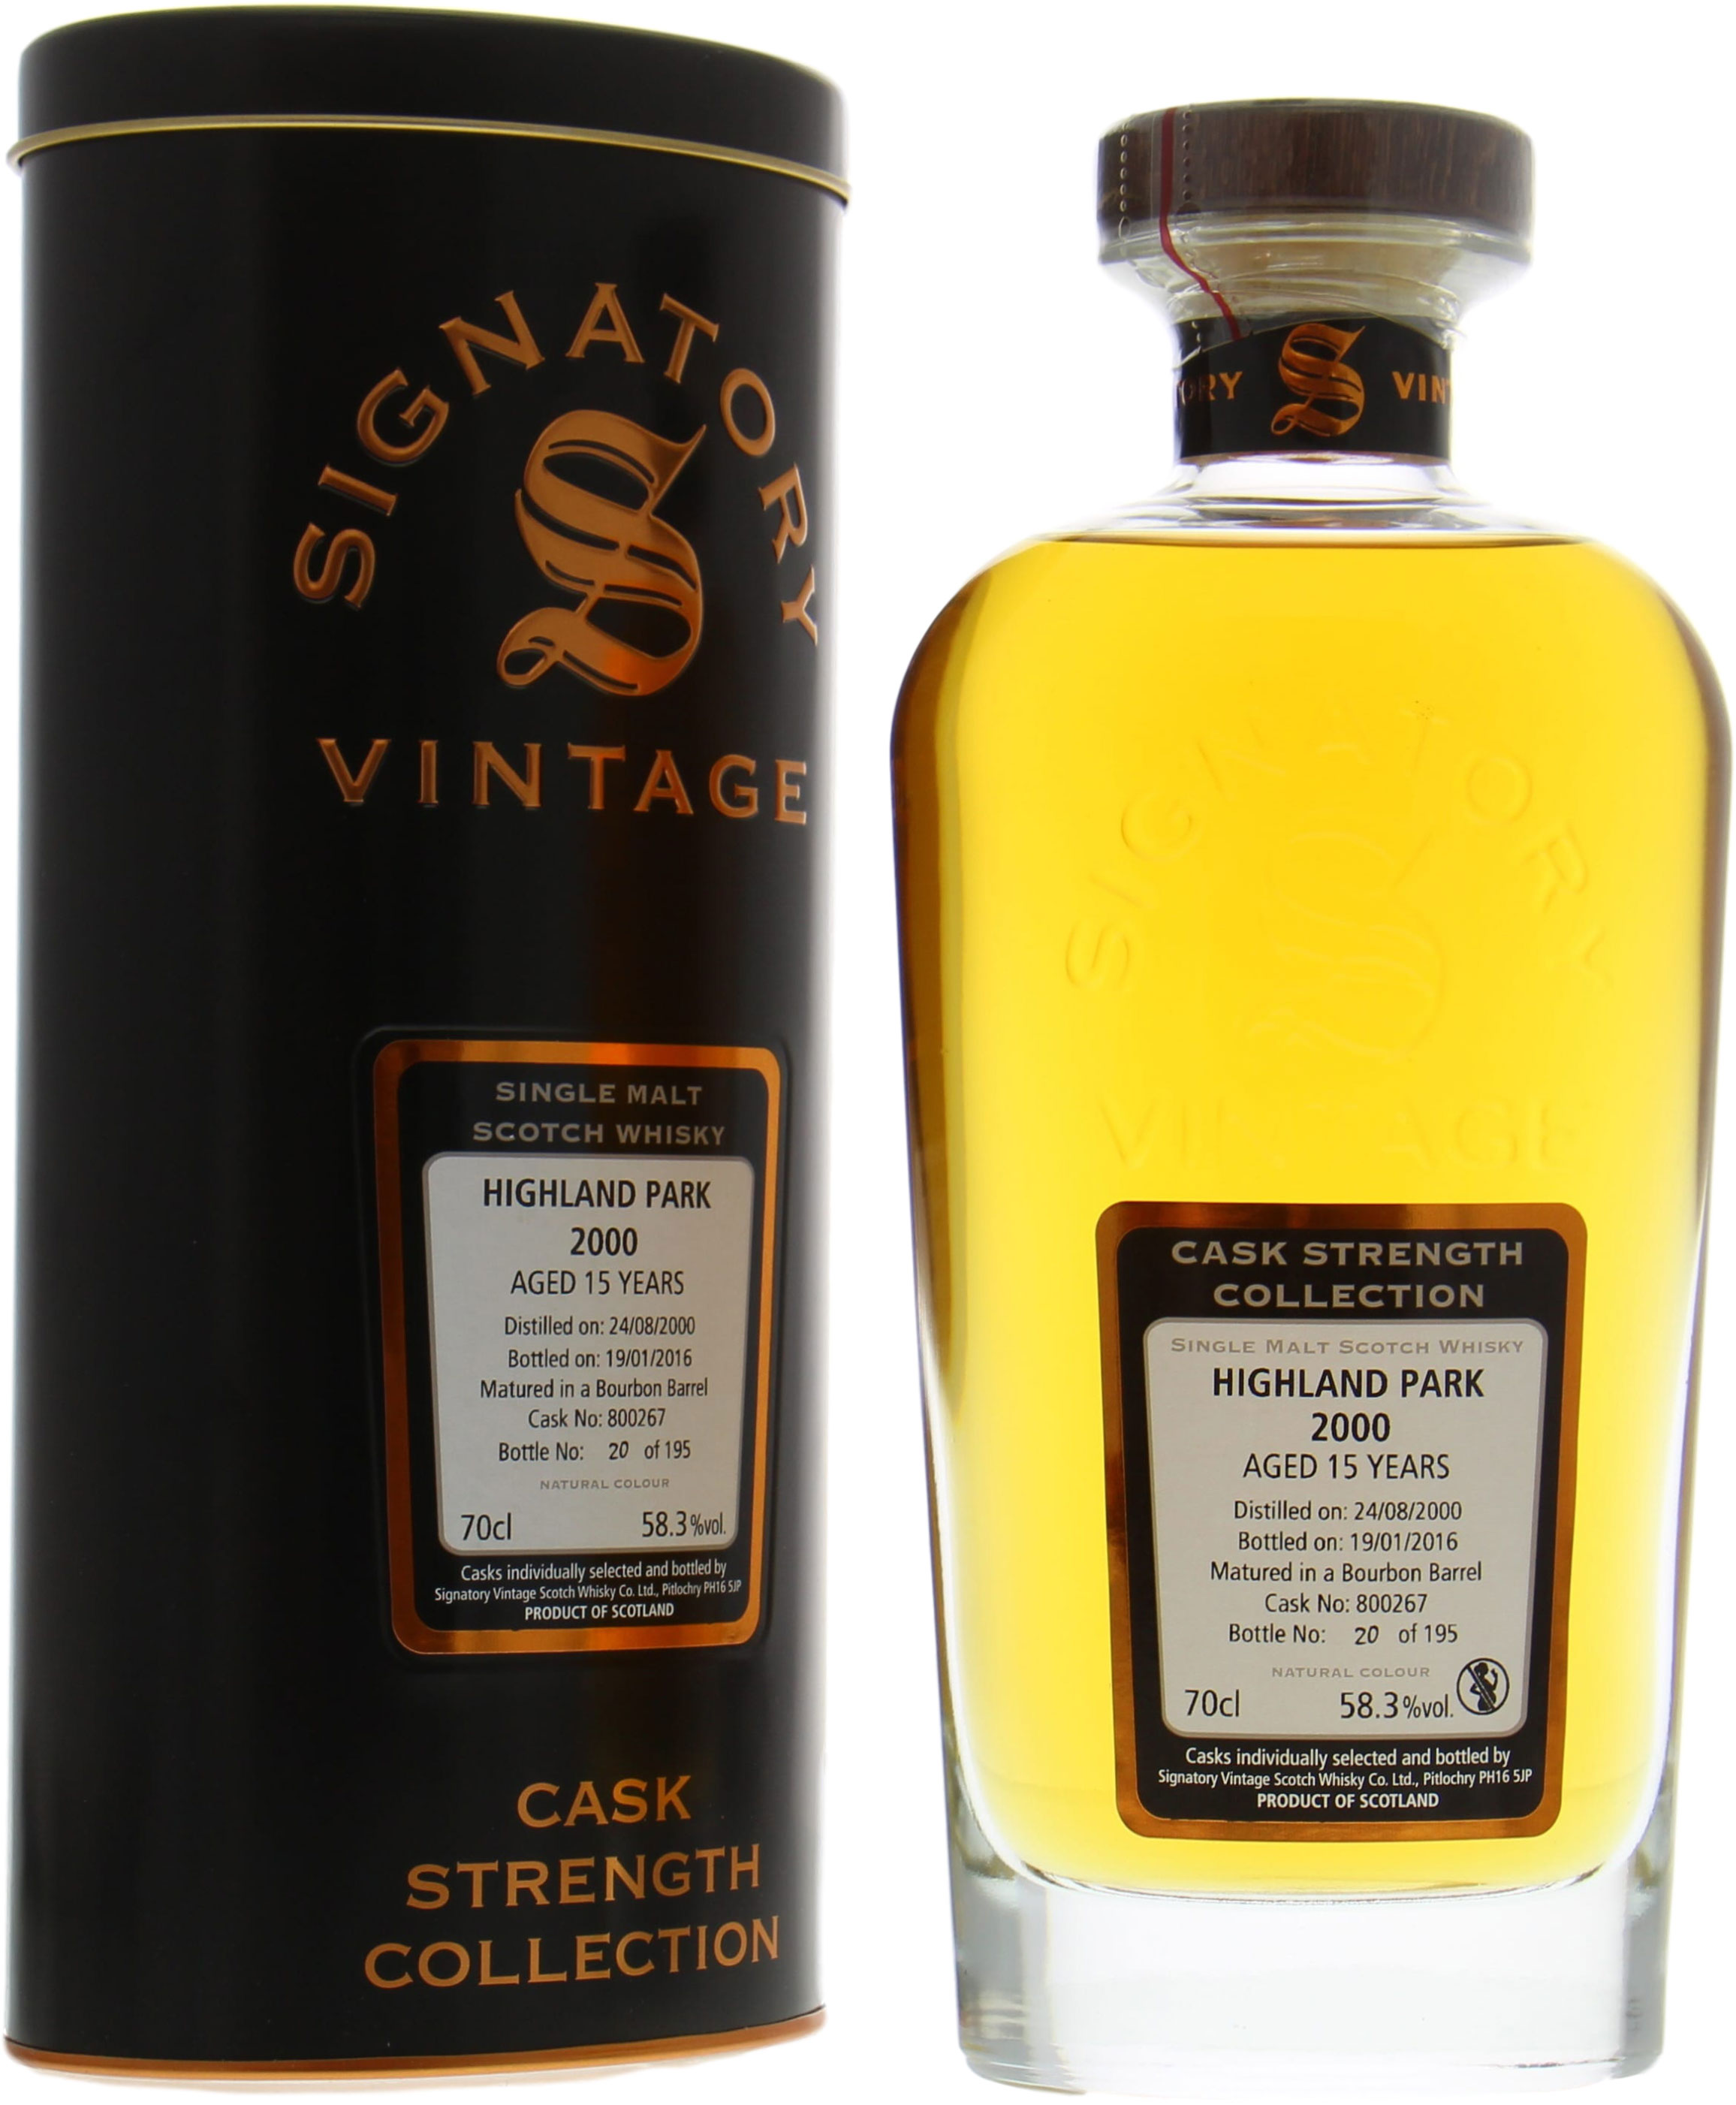 Highland Park - 15 Years Old Signatory Vintage Cask 800267 58.3% 2000 In Original Container